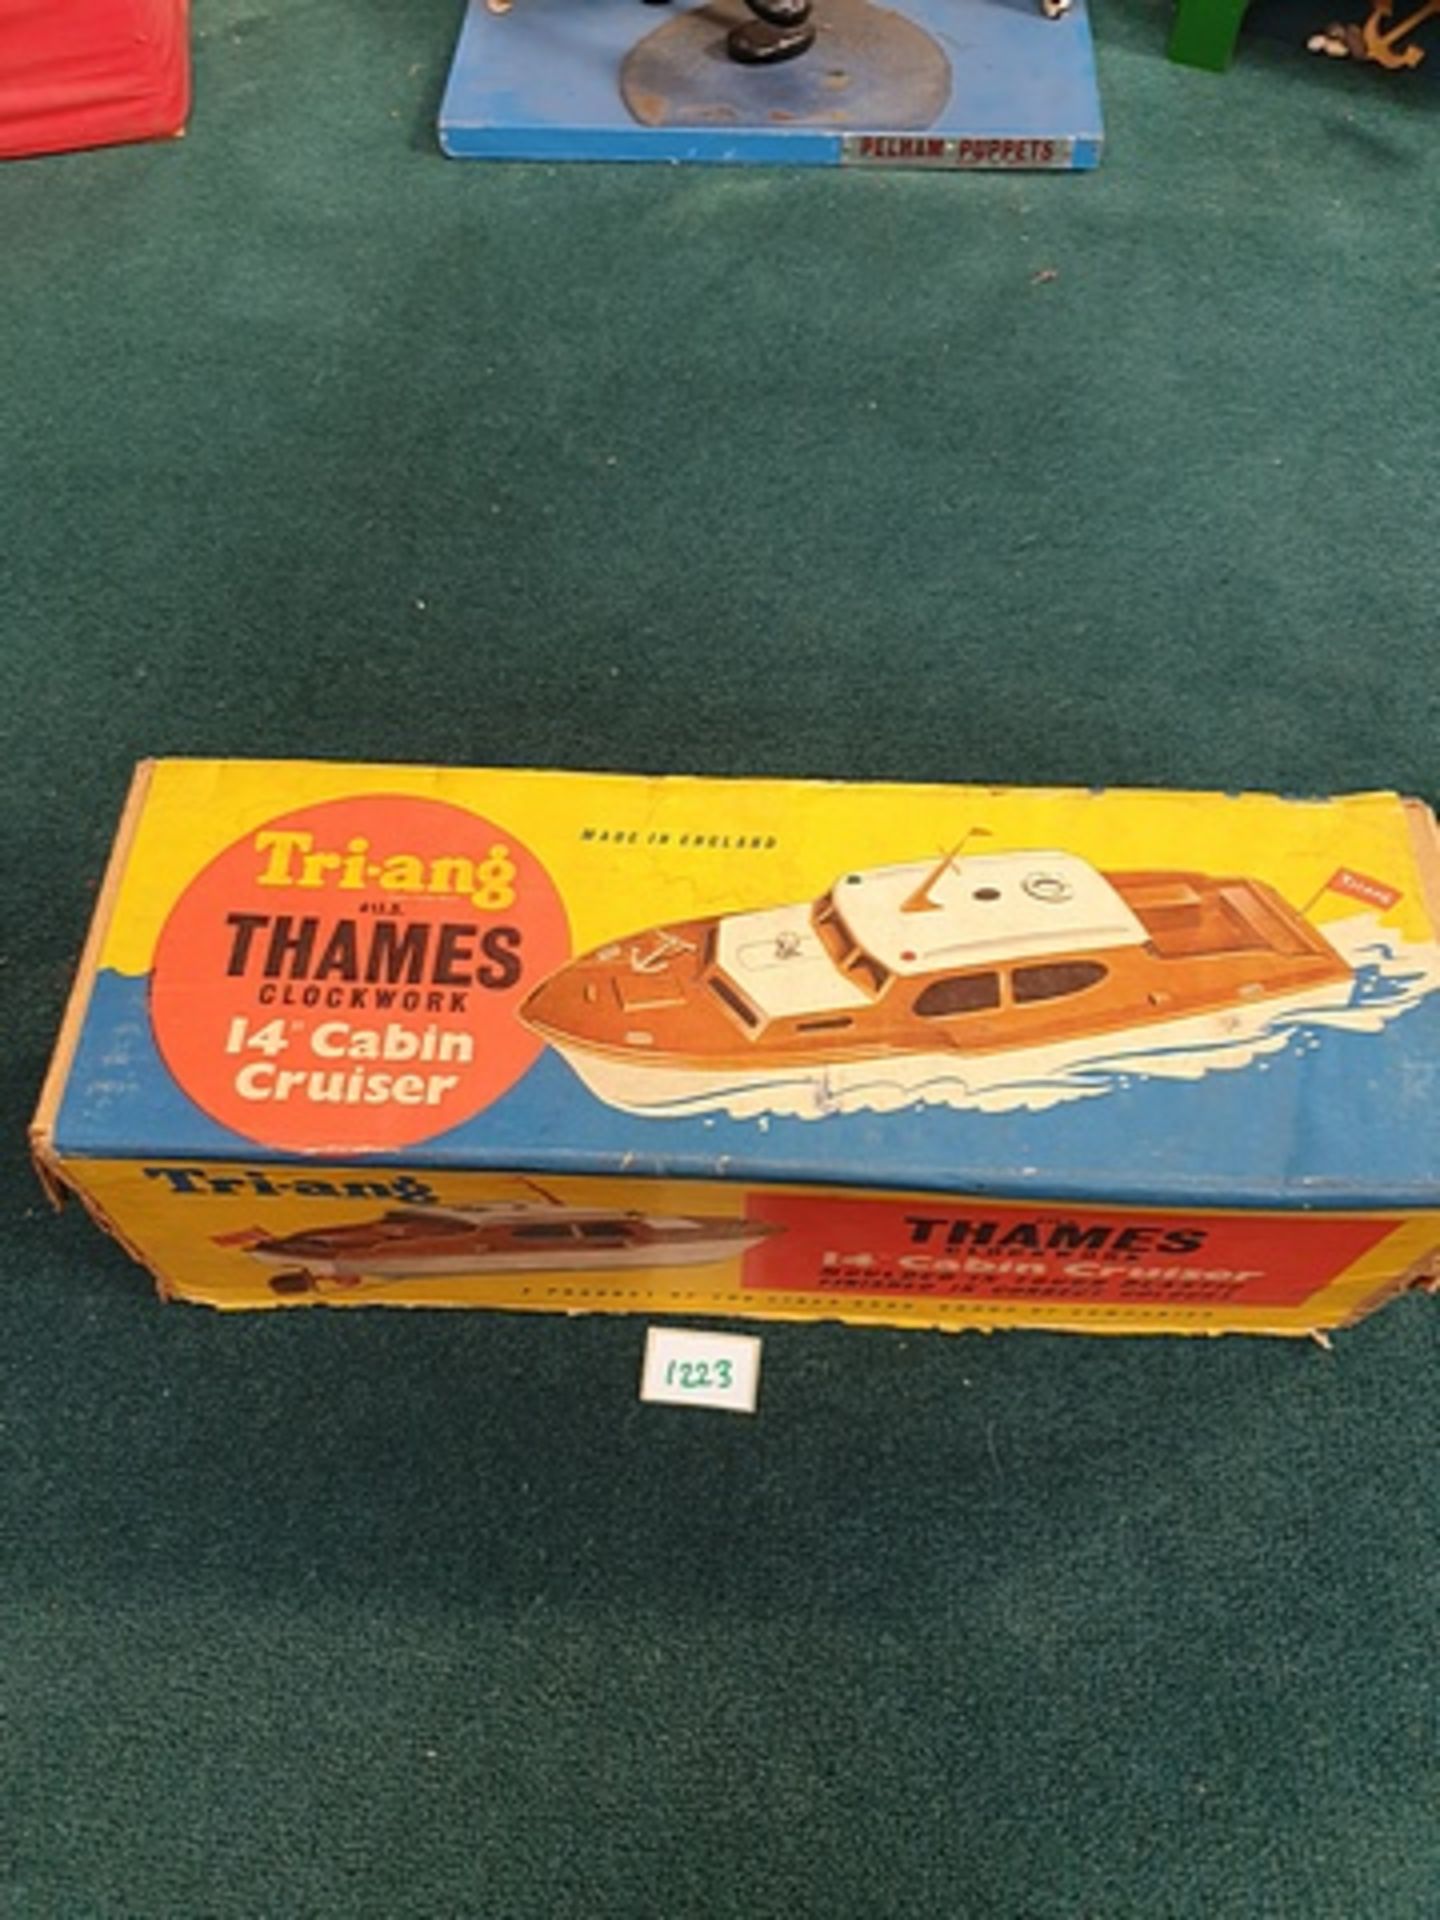 Tri-Ang 413.S. Thames Clockwork 14" Cabin Cruiser Complete In Box - Image 2 of 2